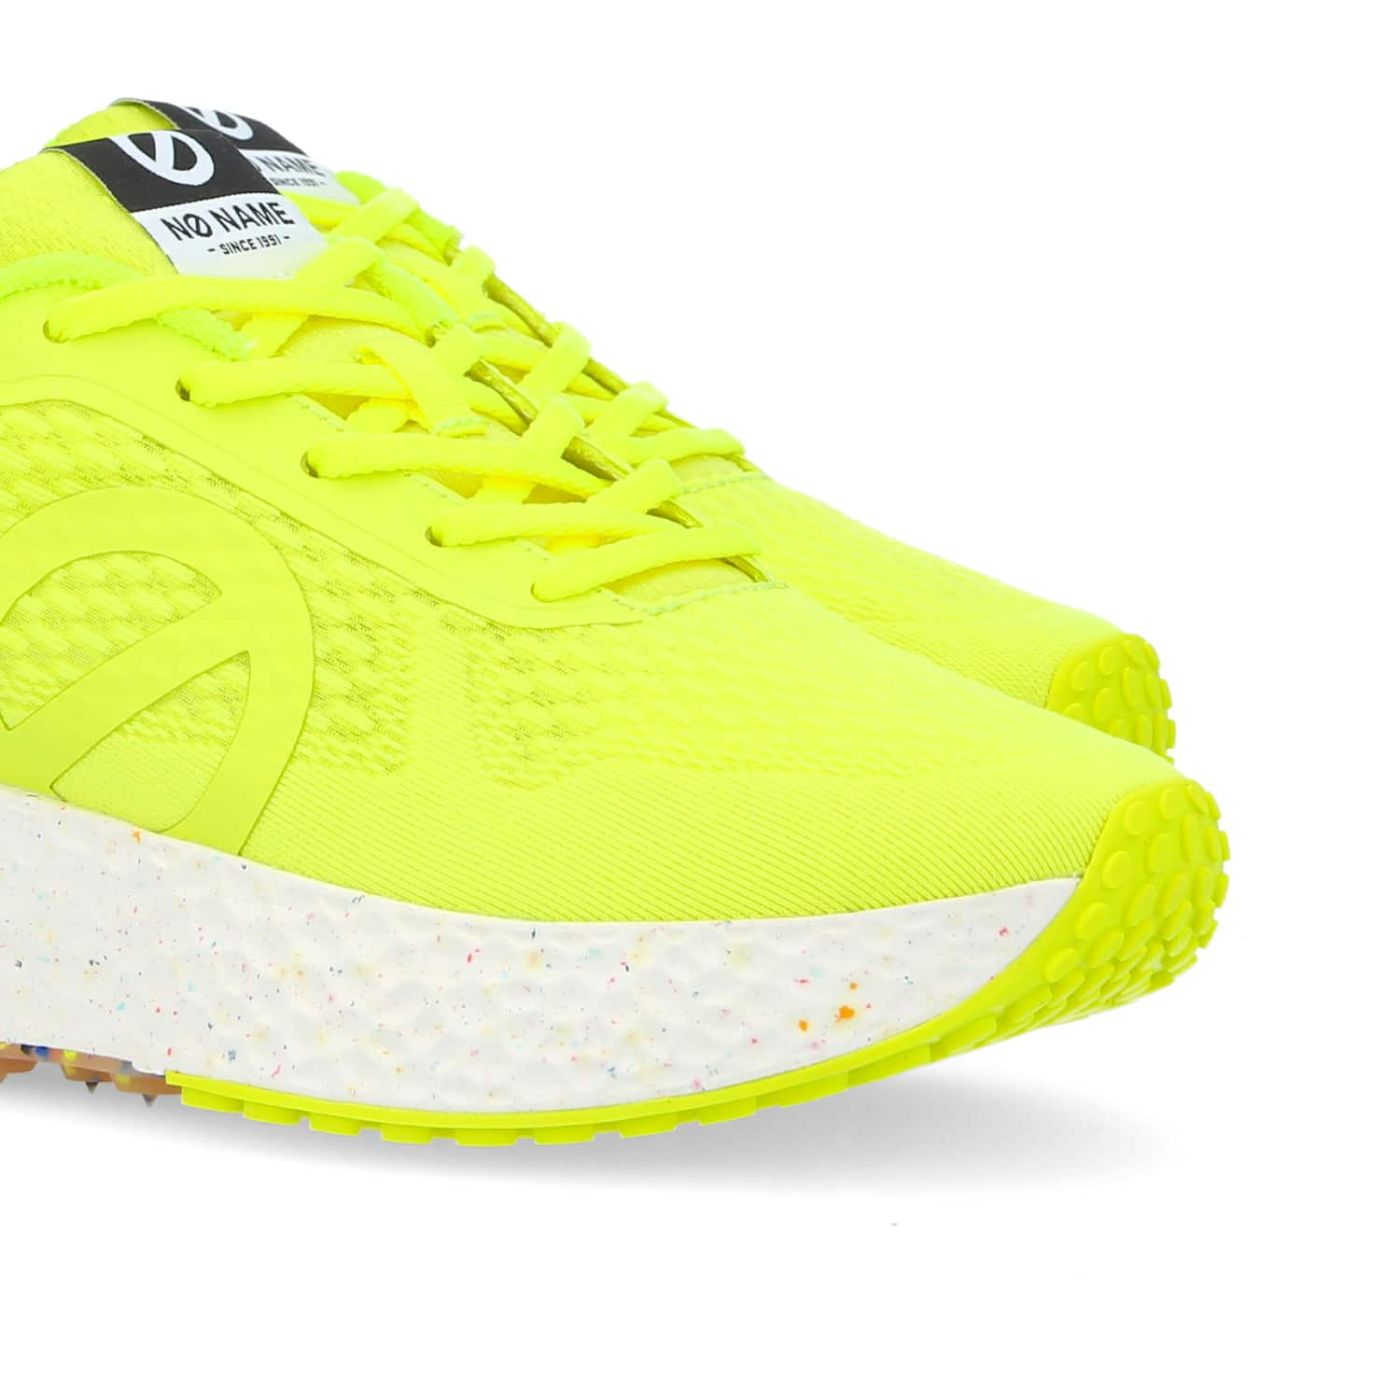 CARTER FLY M - MESH RECYCLED - FLUO YELLOW